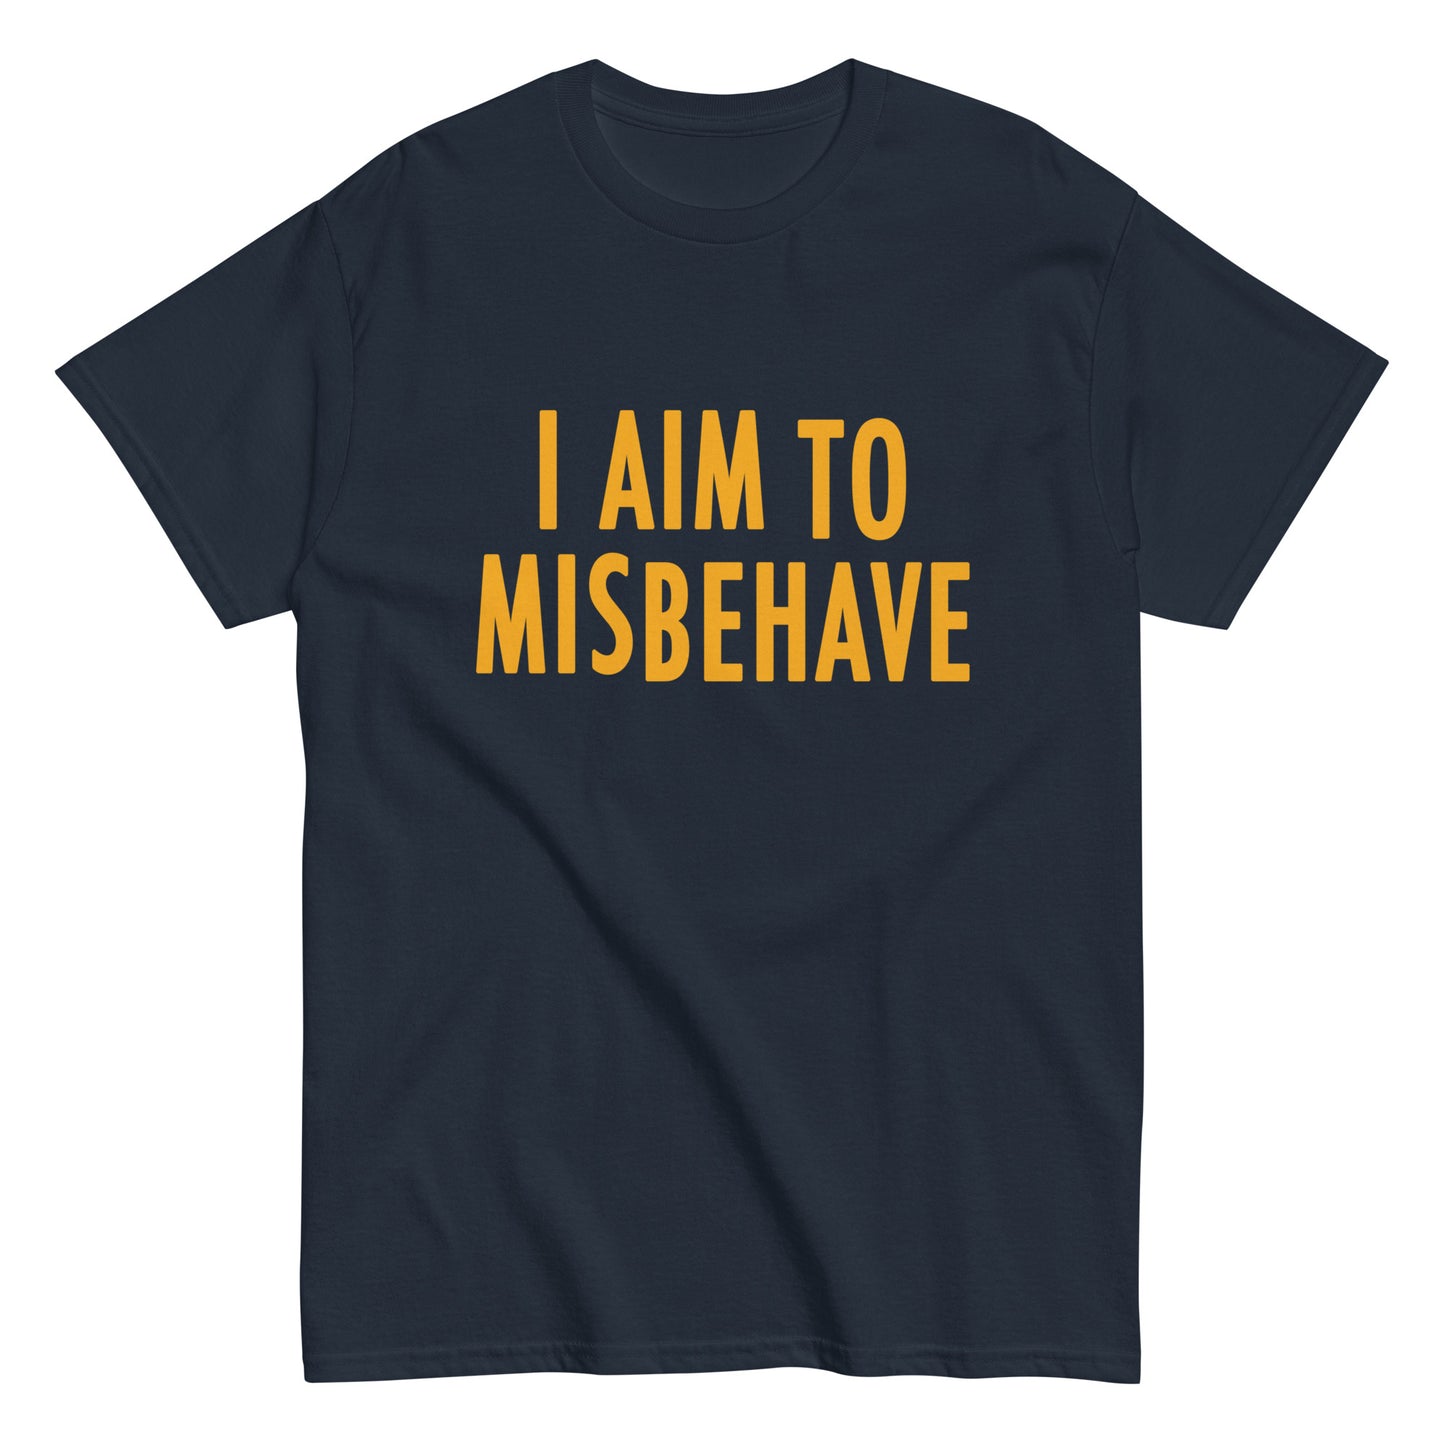 I Aim To Misbehave Men's Classic Tee